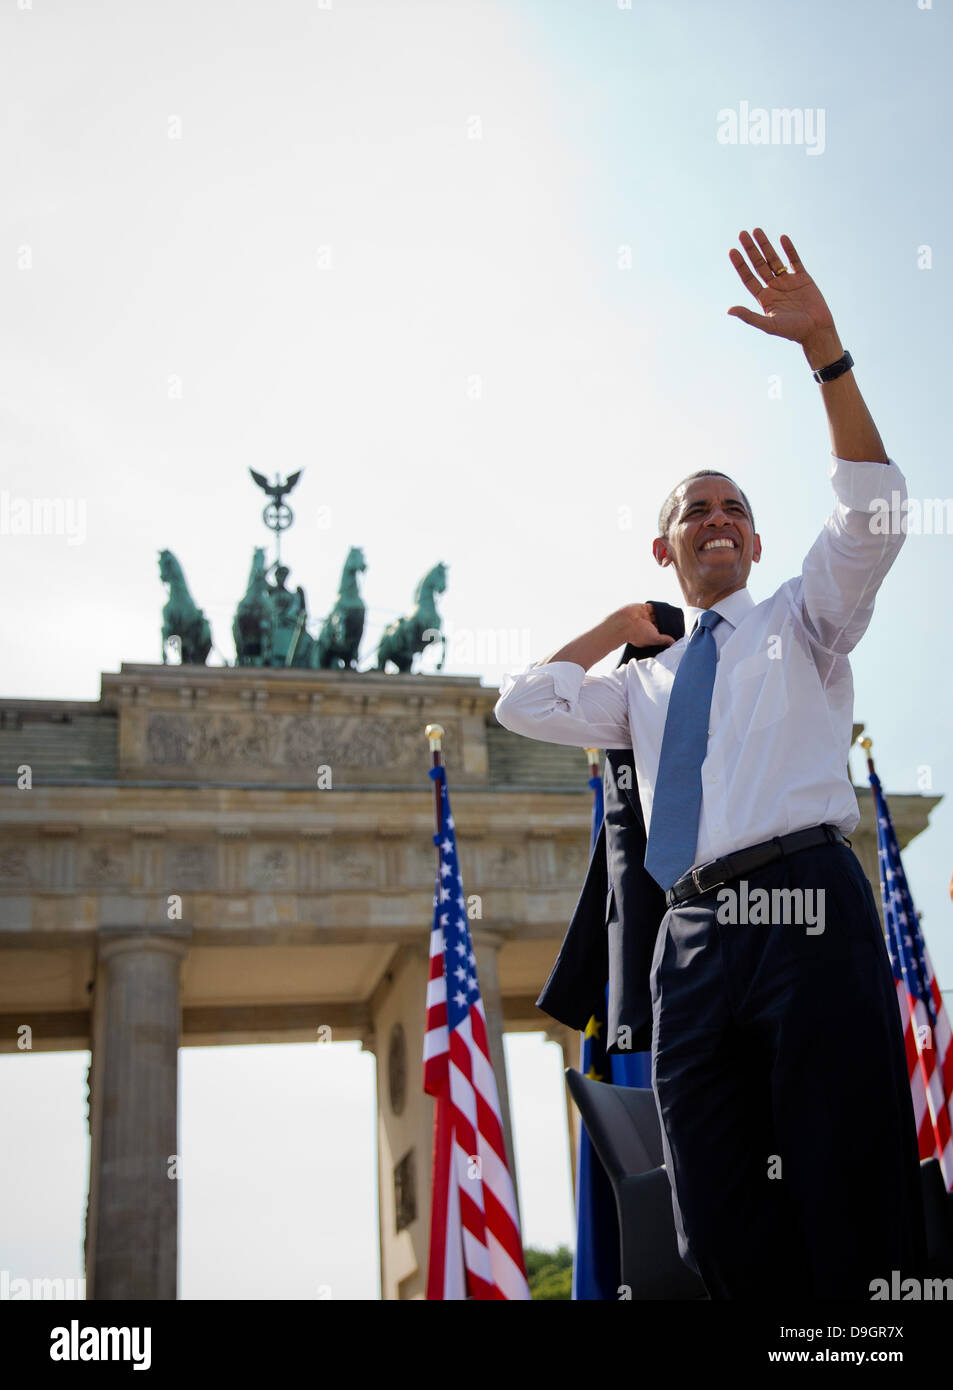 Berlin, Germany. 19th June, 2013. QUALITY REPEAT - US President Barack Obama waves after he deliverd a speech to invited guests in front of Brandenburg Gate at Pariser Platz in Berlin, Germany, 19 June 2013. Photo: Michael Kappeler/dpa /dpa/Alamy Live News Stock Photo